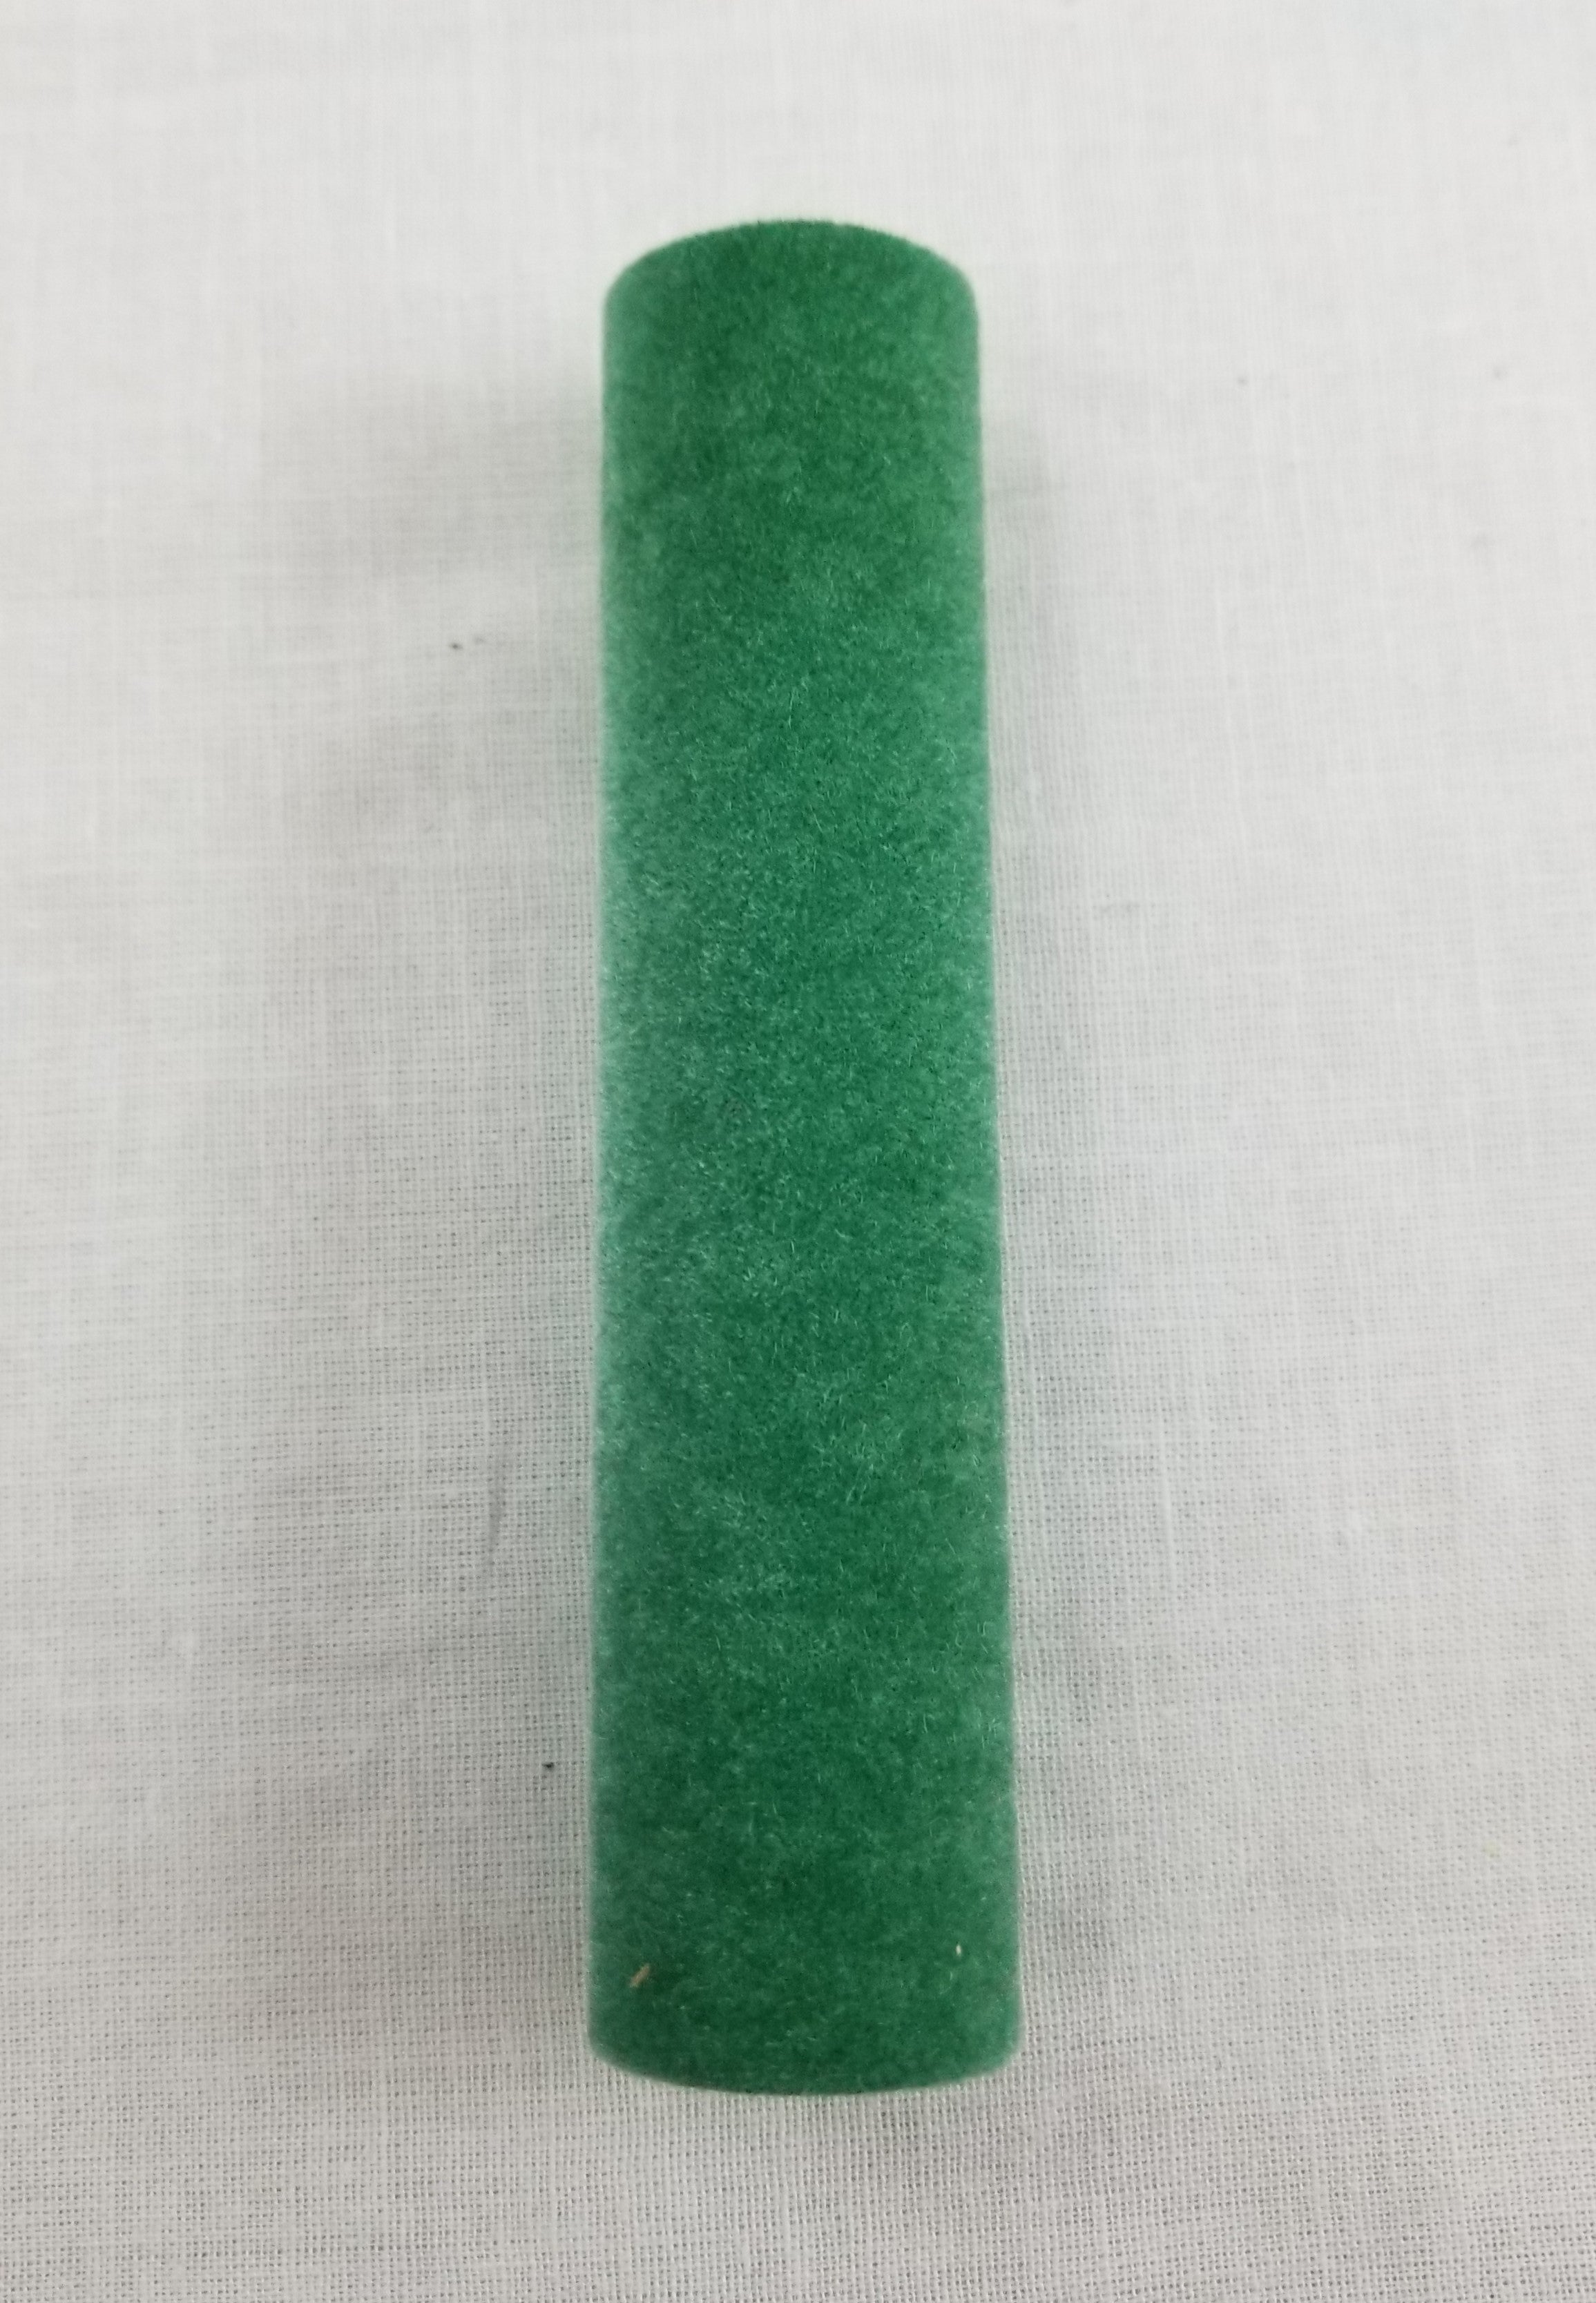 4" Velvet Candle Cover in Green